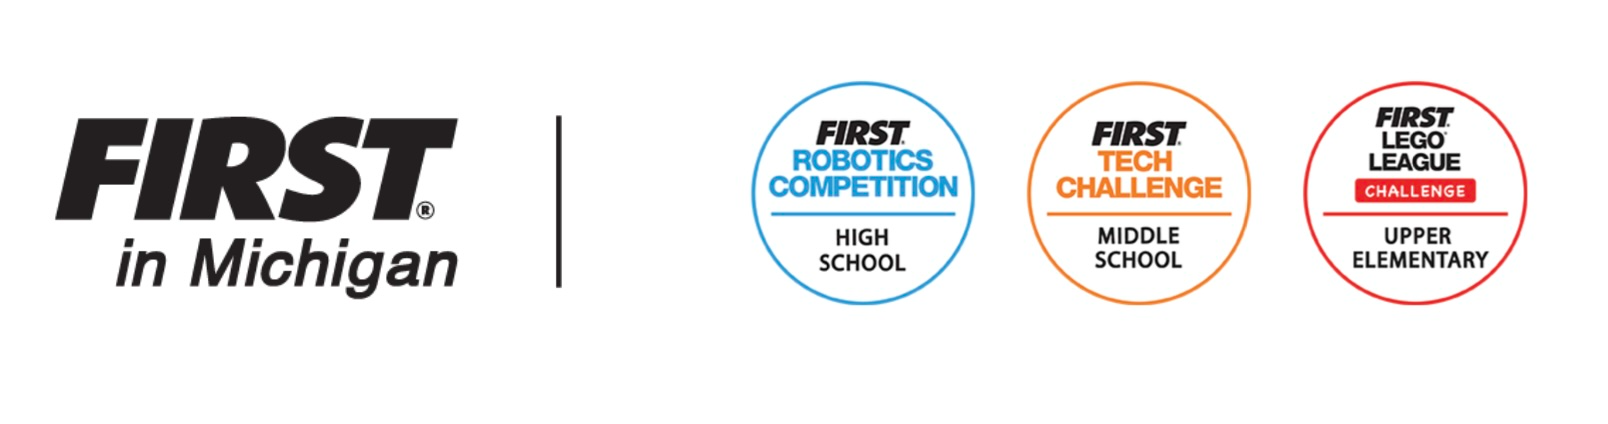 First in Michigan - First Robotics Competition  Highschool - First Tech Challenge Middle School - First LEGO League Challenge Upper Elementary